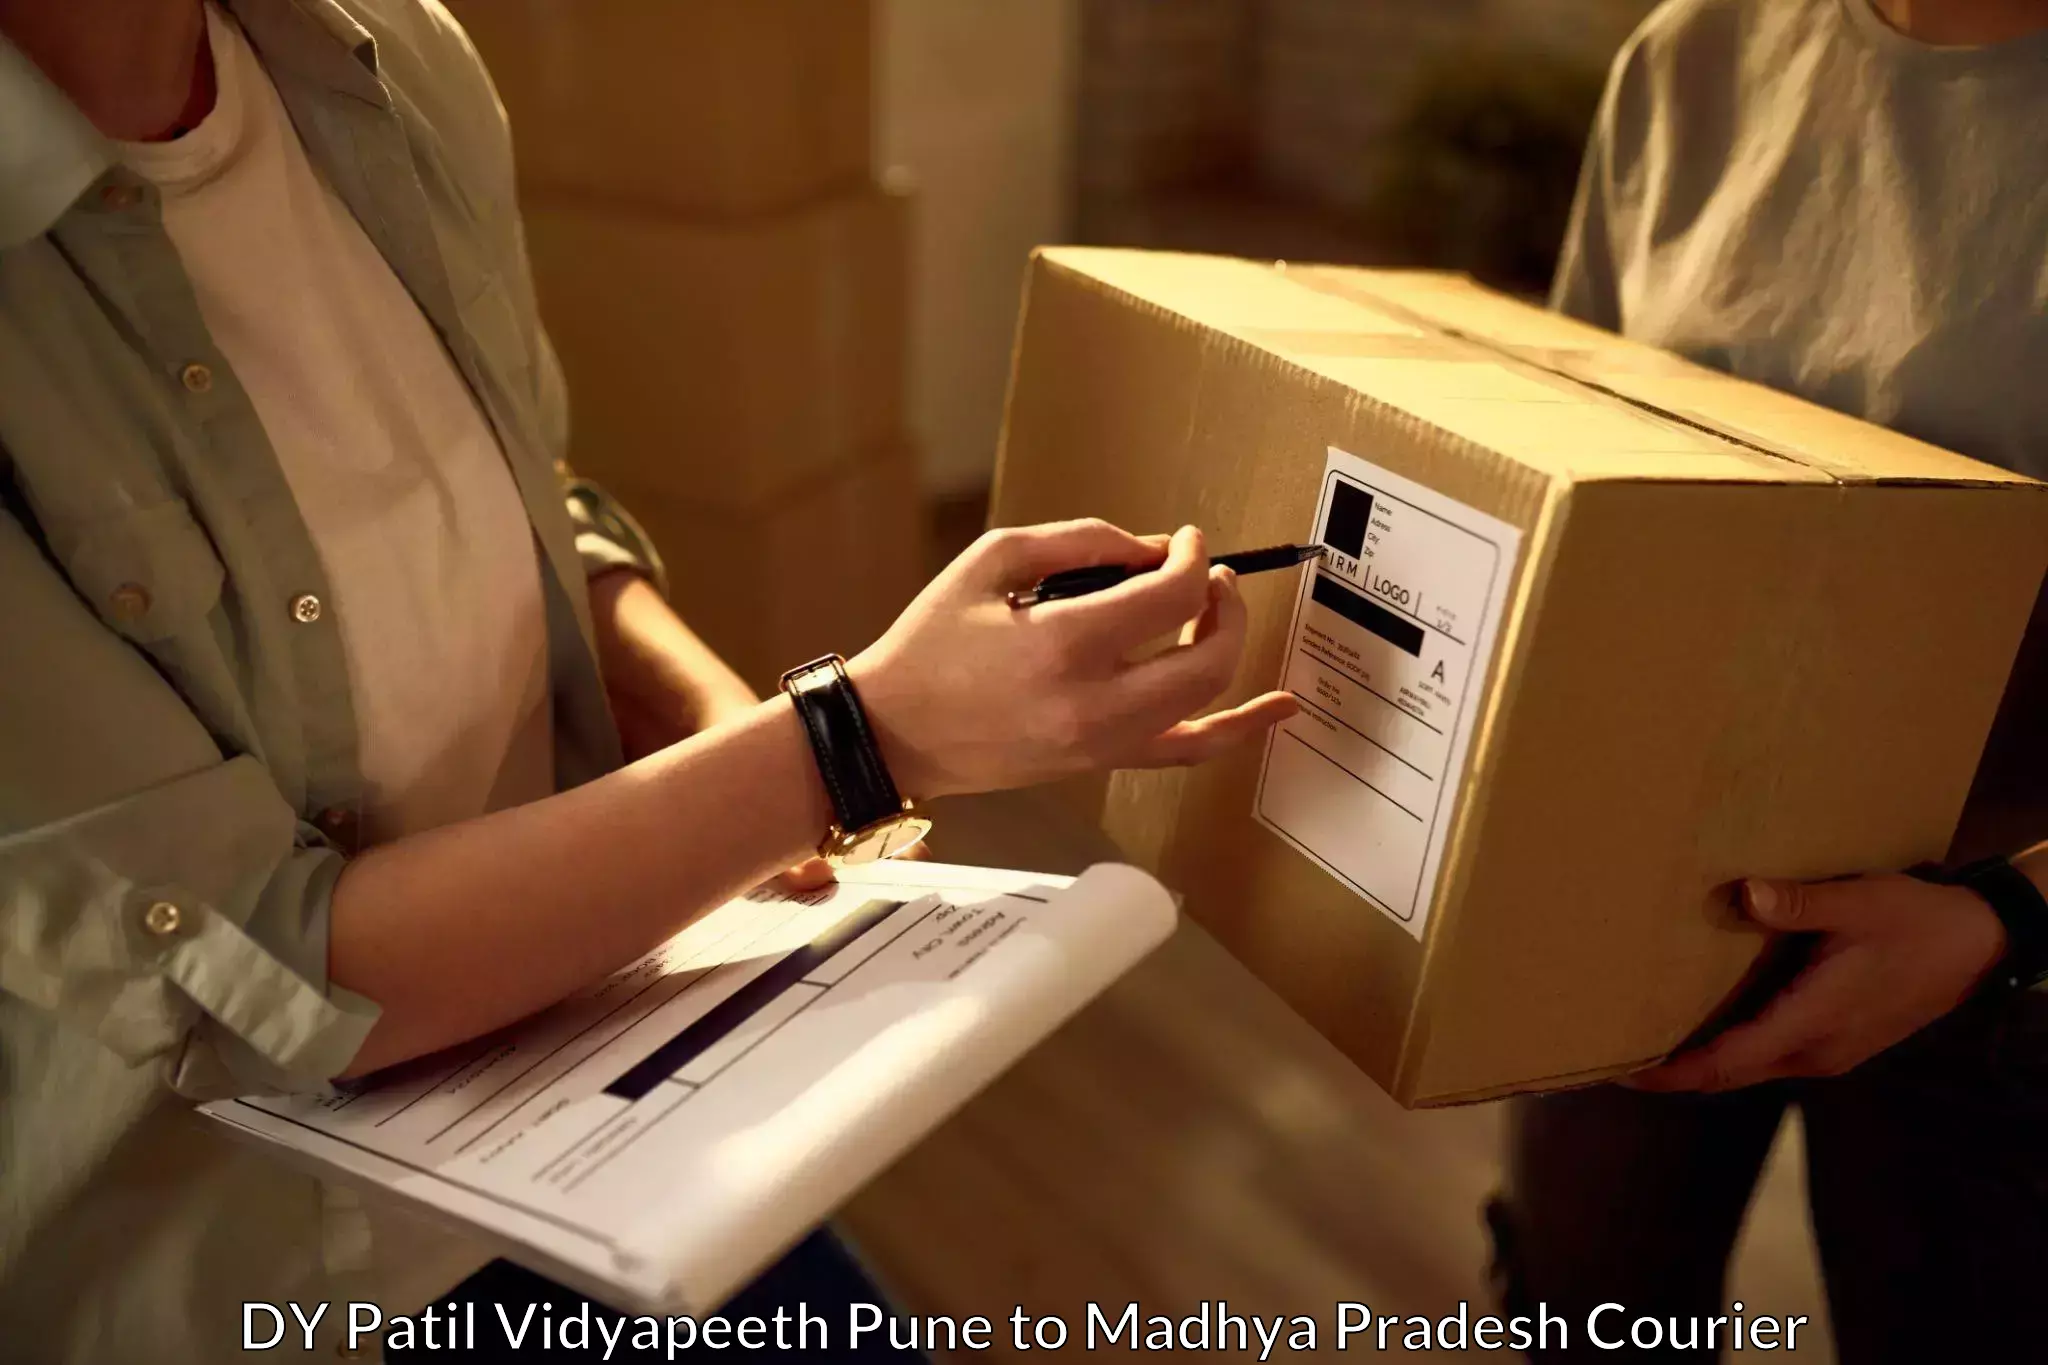 Urgent courier needs DY Patil Vidyapeeth Pune to Polay Kalan